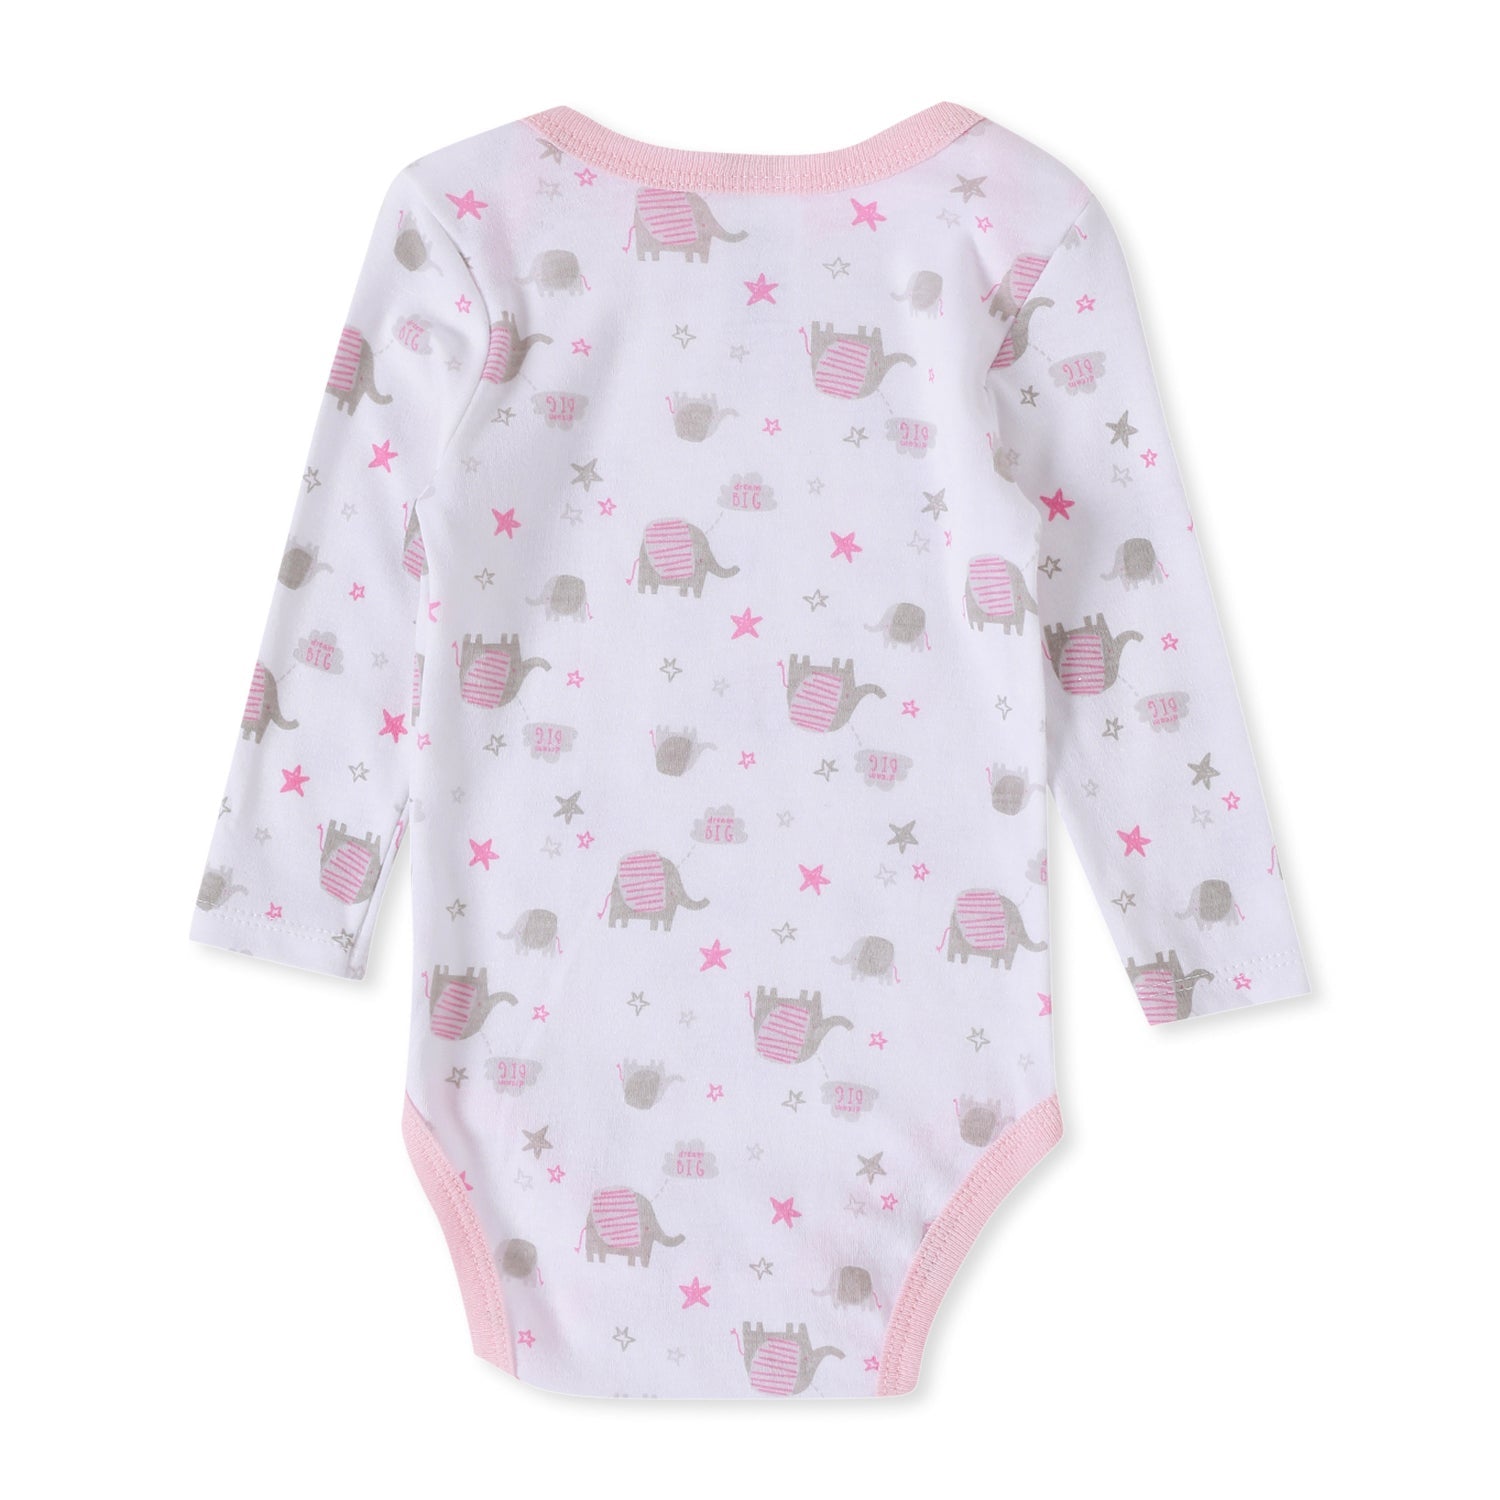 Giggles & Wiggles Elephant Parade Pink Onesies With Legging